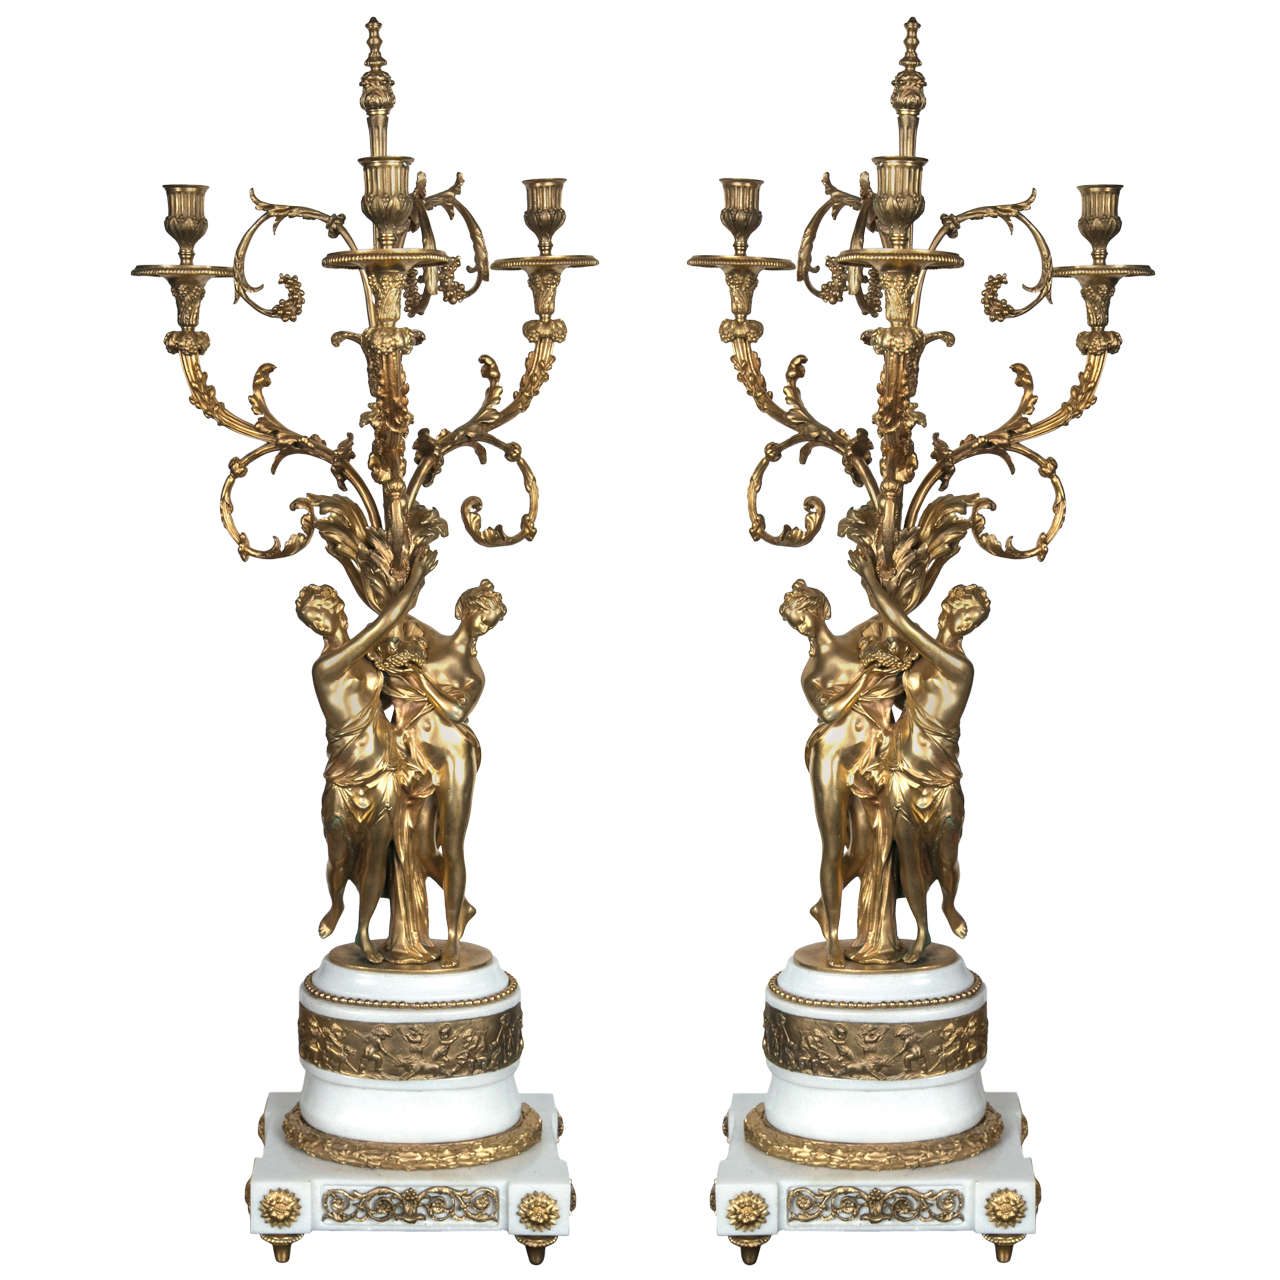 Pair of Three-Light Gilt Bronze and Marble Candelabras For Sale